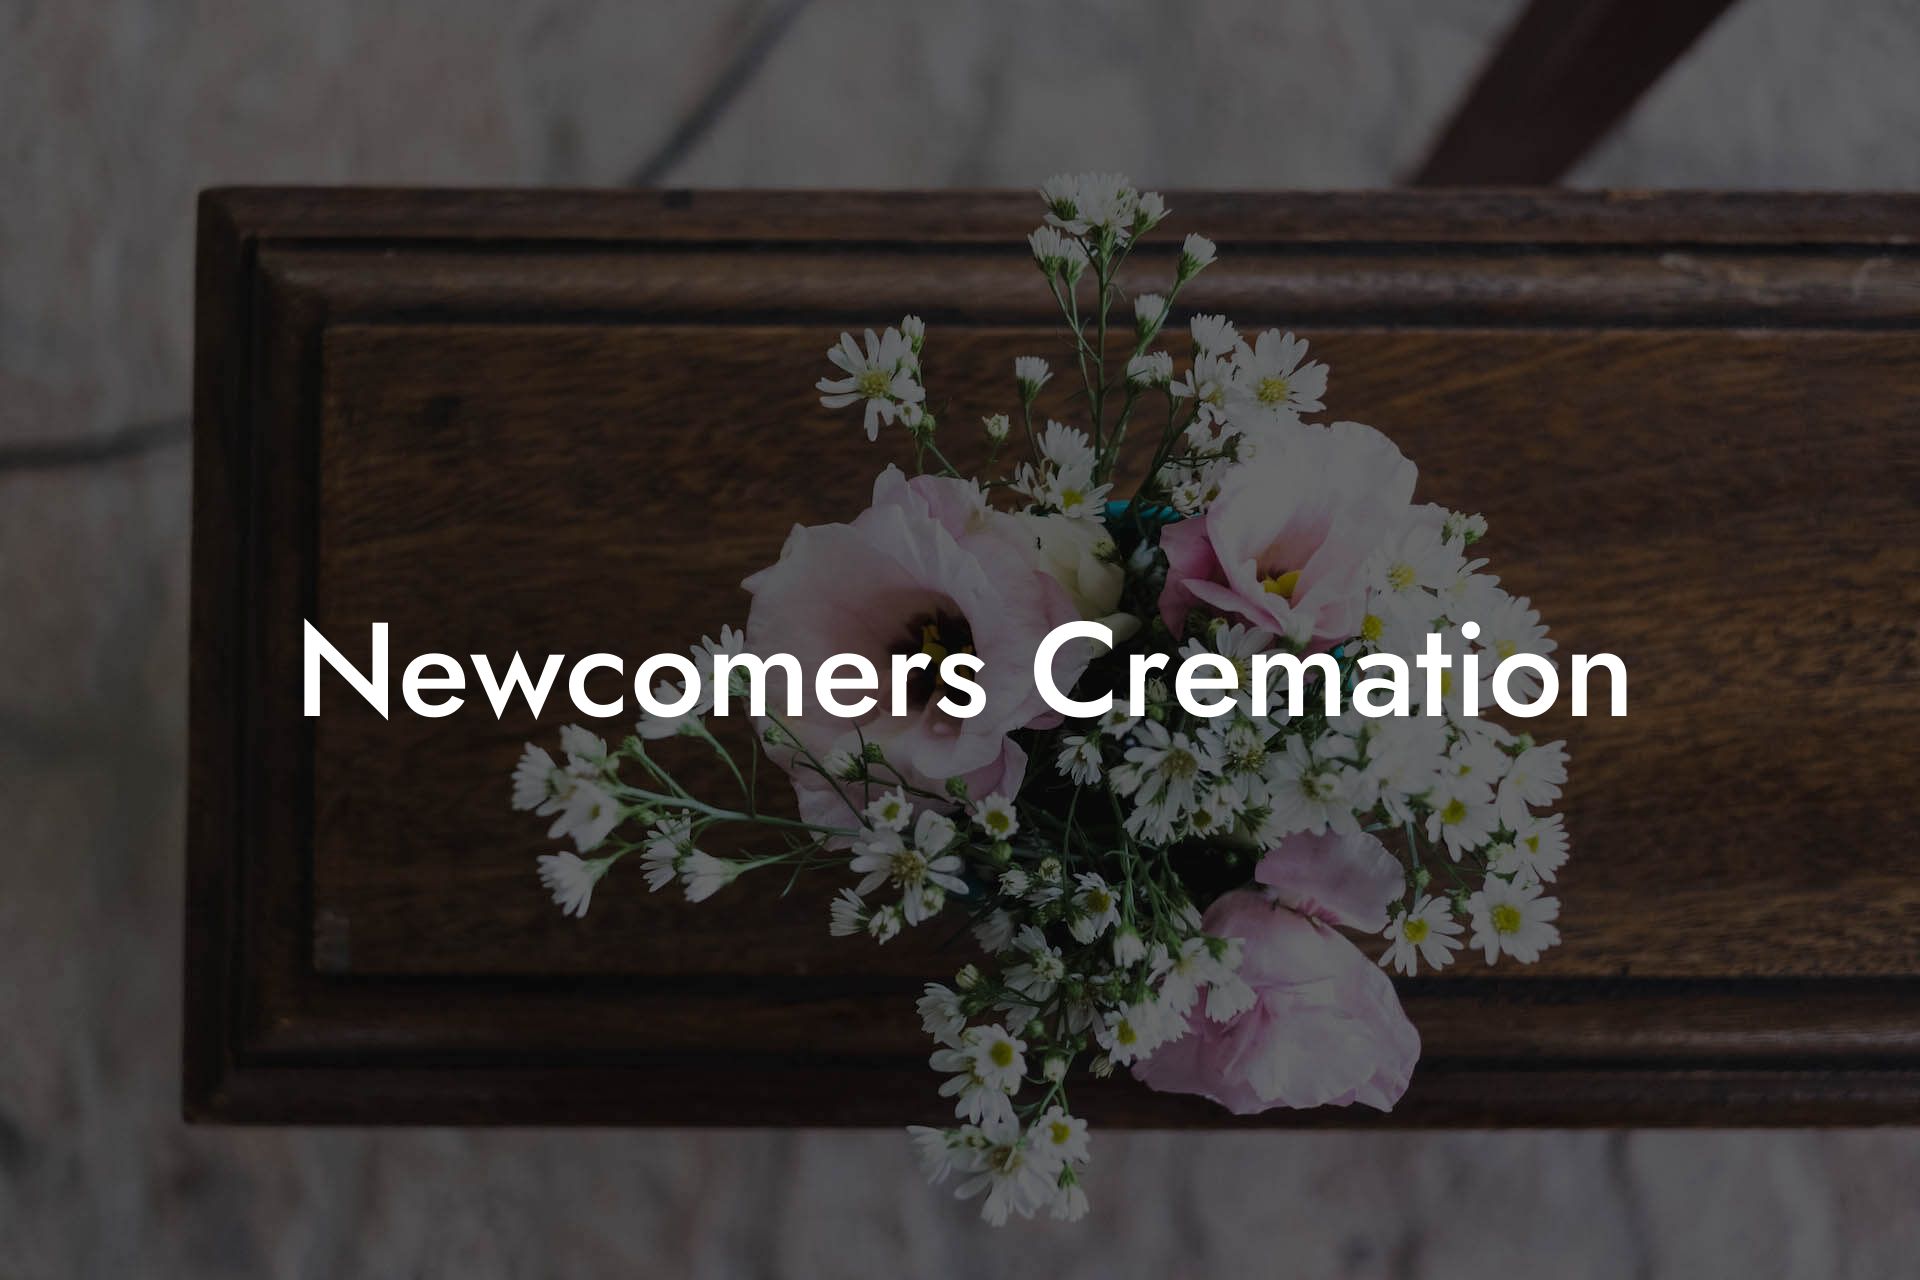 Newcomers Cremation